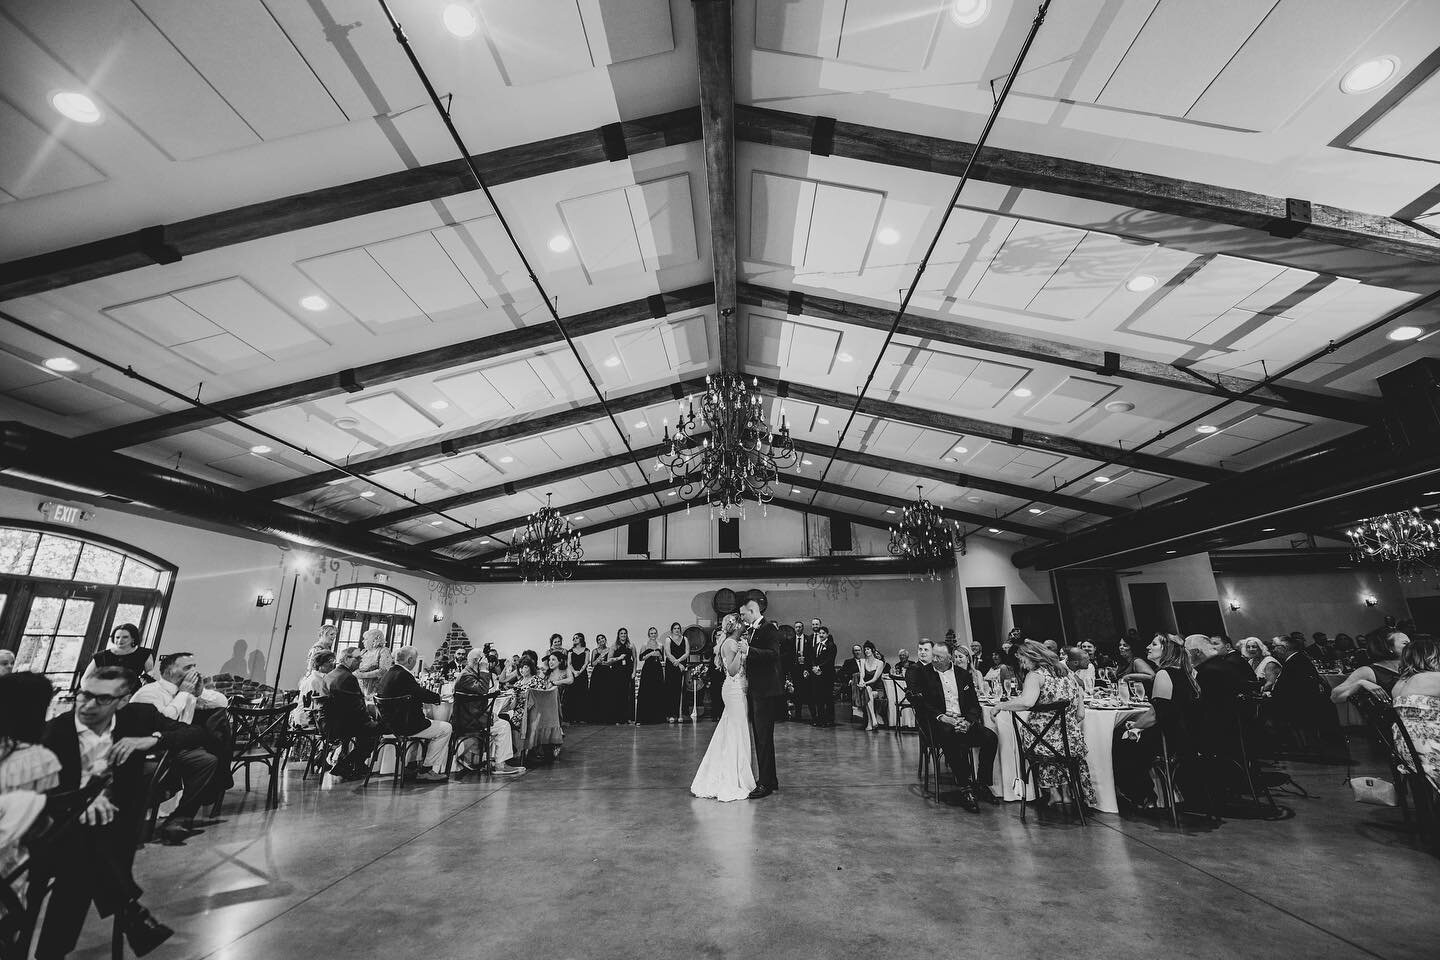 First dance in a timeless moment at the Chianti Room, where memories are etched in elegance. 🖤✨ Celebrating love in black and white amidst the beauty of our venue, accommodating 200 guests, capturing the start of a lifetime together. 
📸  cnk_photo